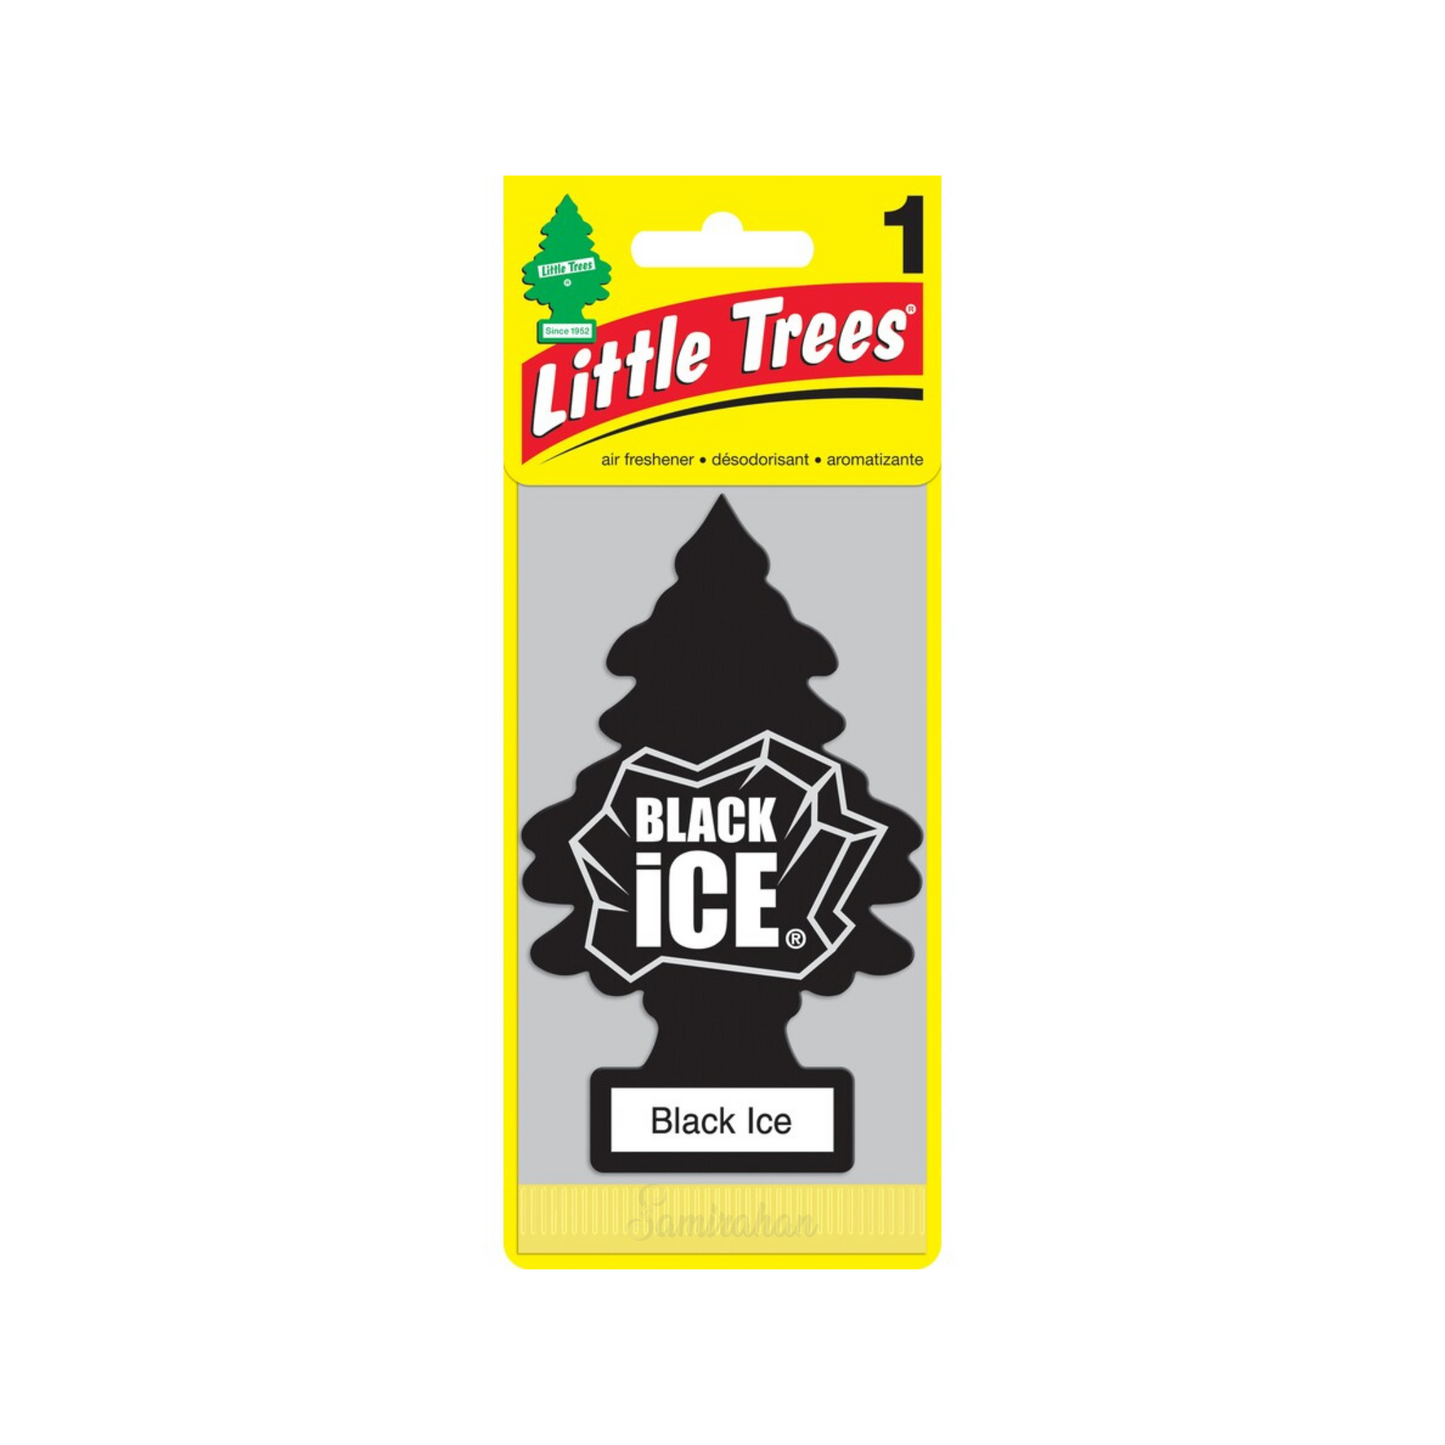 Little Trees Black Ice is a carded air freshener, with the scent of wood & citrus. Freshen your life with this world-famous fragrance. Best imported foreign Australian USA American perfume car accessory accessories vehicle odor remover neutralise luxury quality premium real brand cheap price in Dhaka Bangladesh.